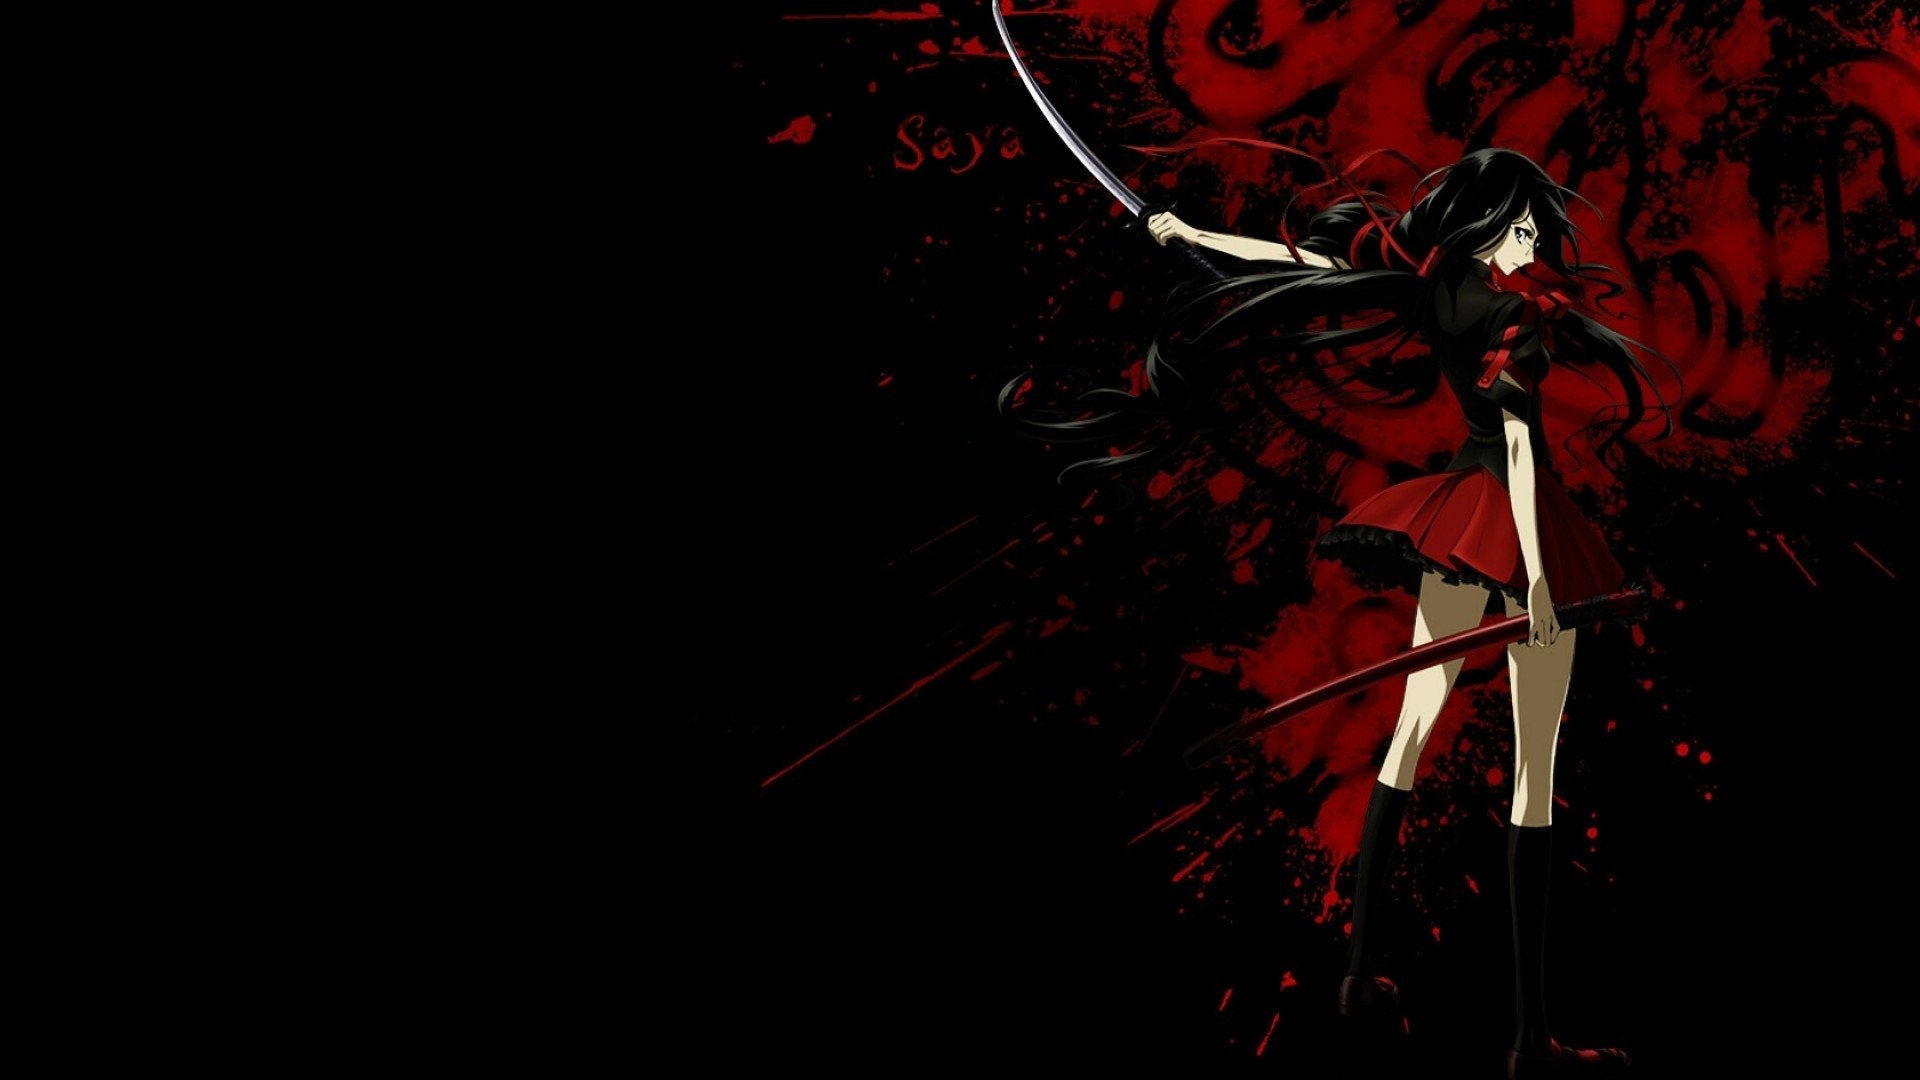 36 Blood C HD Wallpapers Backgrounds Wallpaper Abyss